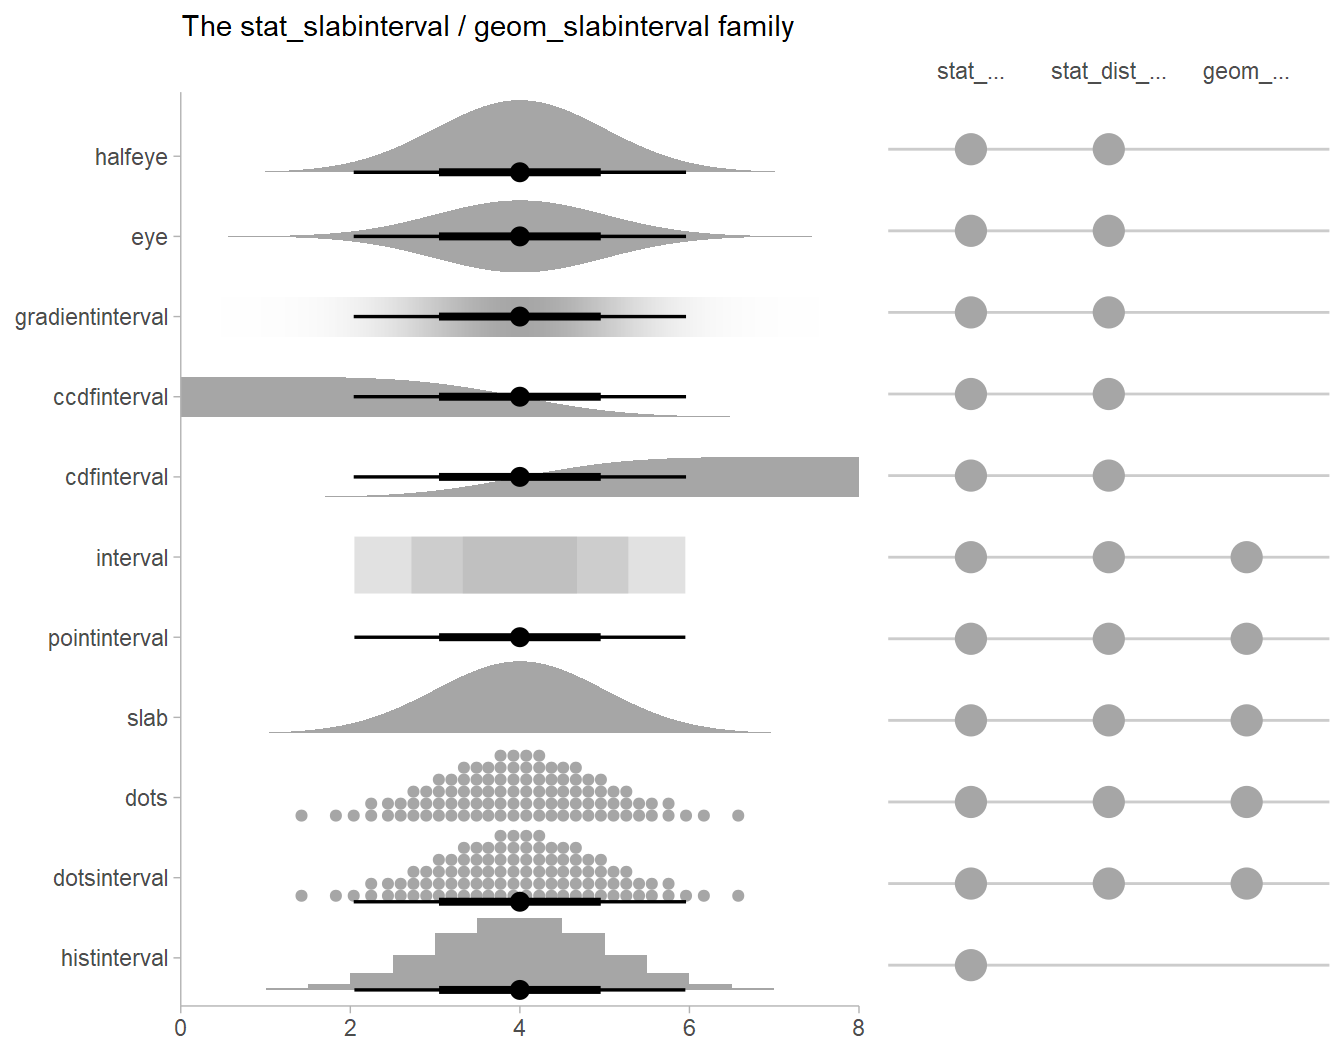 The slabinterval family of geoms and stats